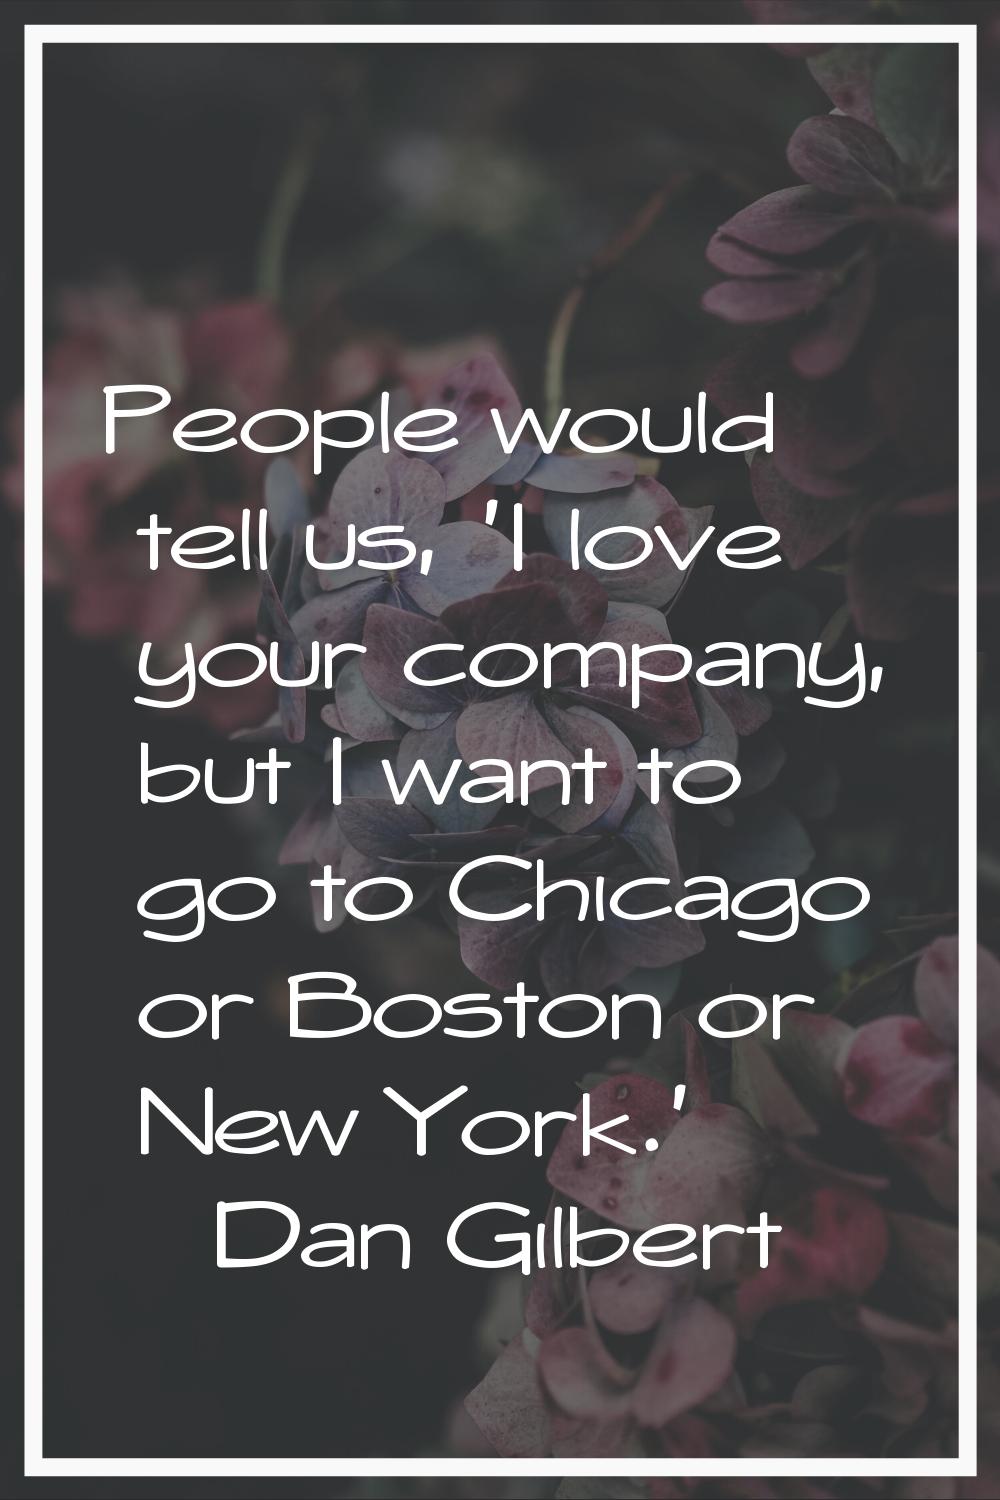 People would tell us, 'I love your company, but I want to go to Chicago or Boston or New York.'